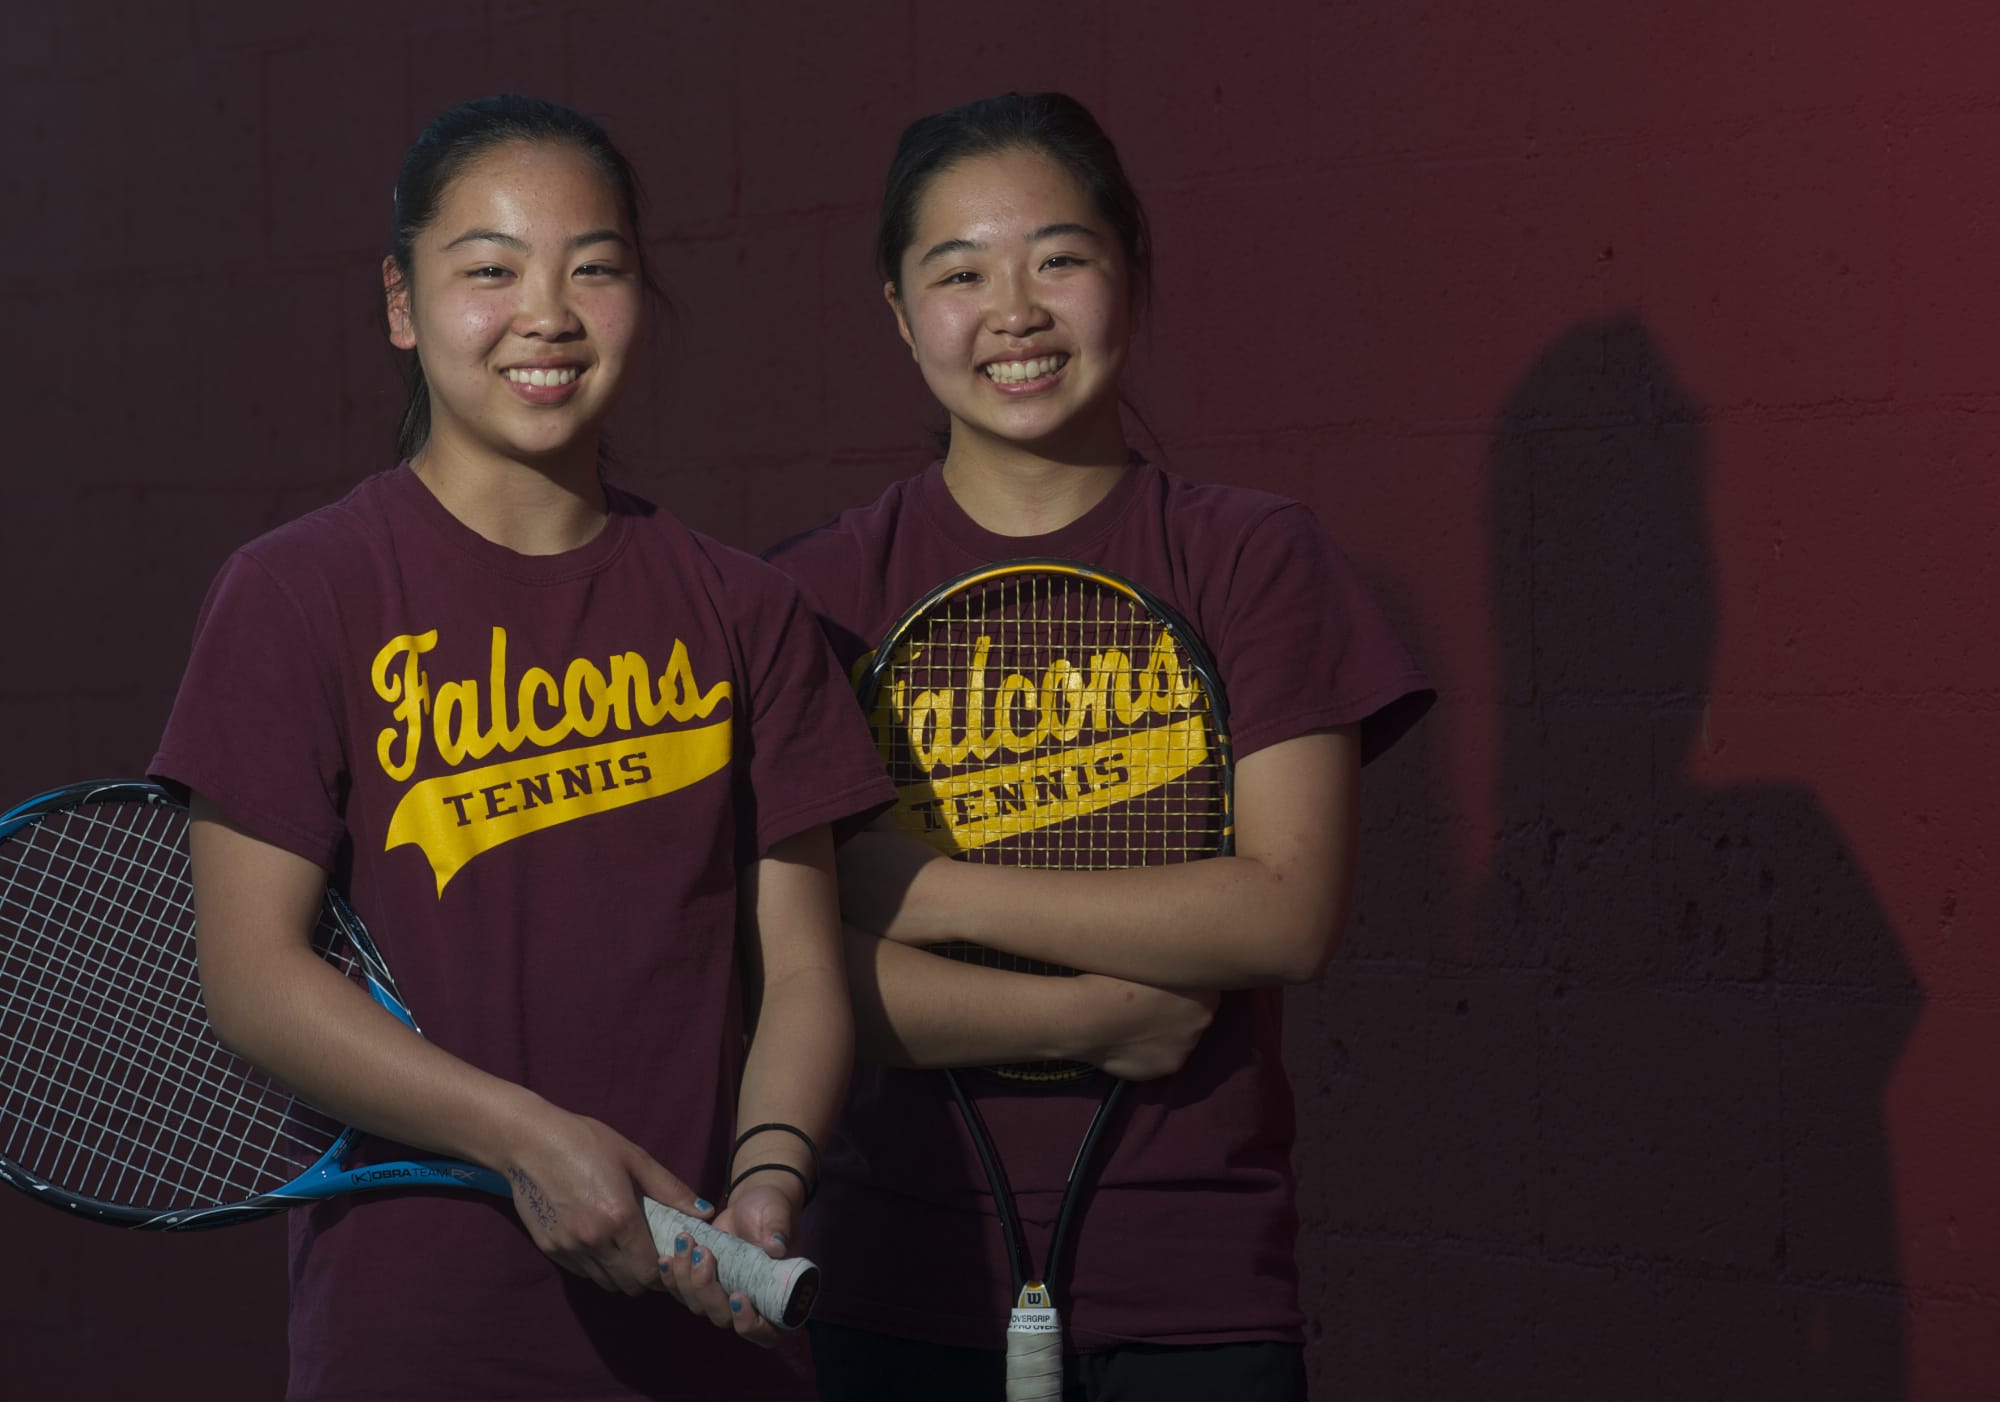 Prairie tennis team members and sisters (from left) Akari Baba, 14, and Shiori Baba, 17, pose for a portrait before a match at PHS on Monday April 23, 2012.